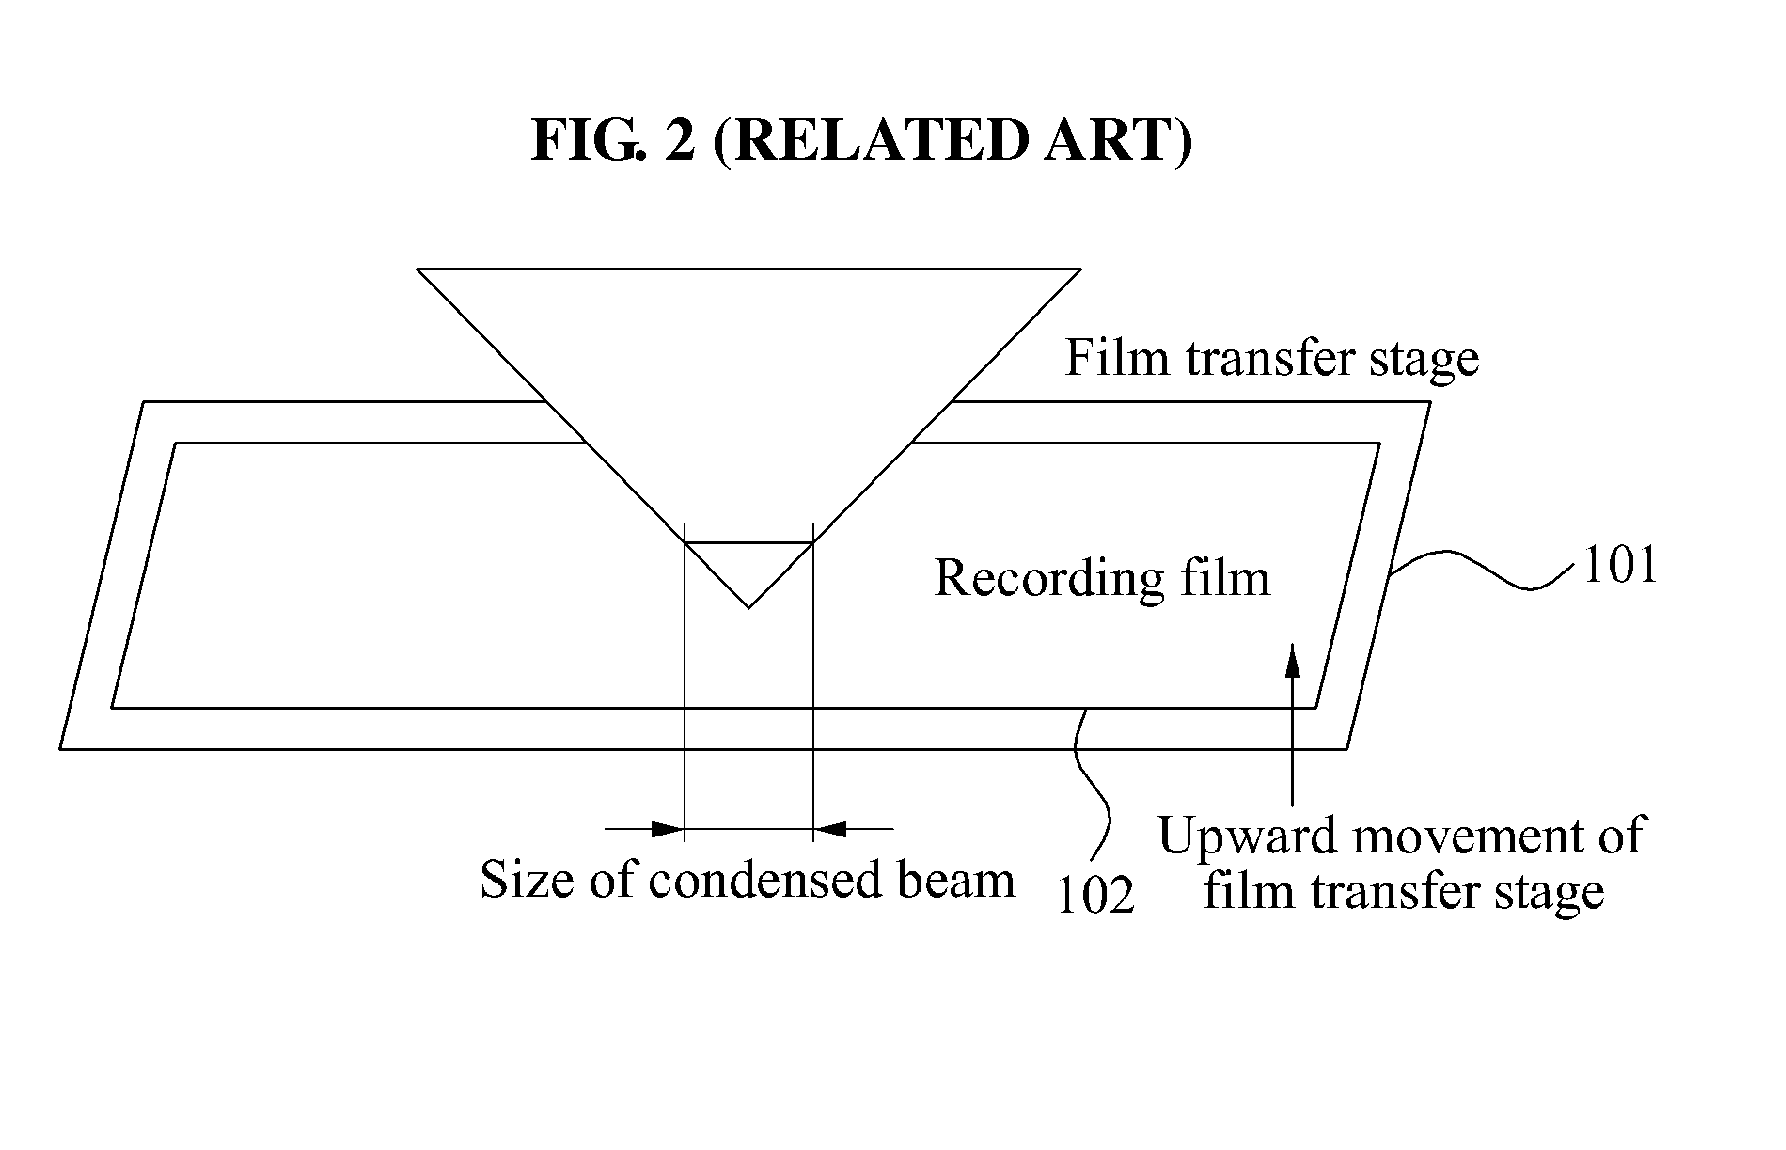 Digital holographic image recording method and system based on hierarchical hogel